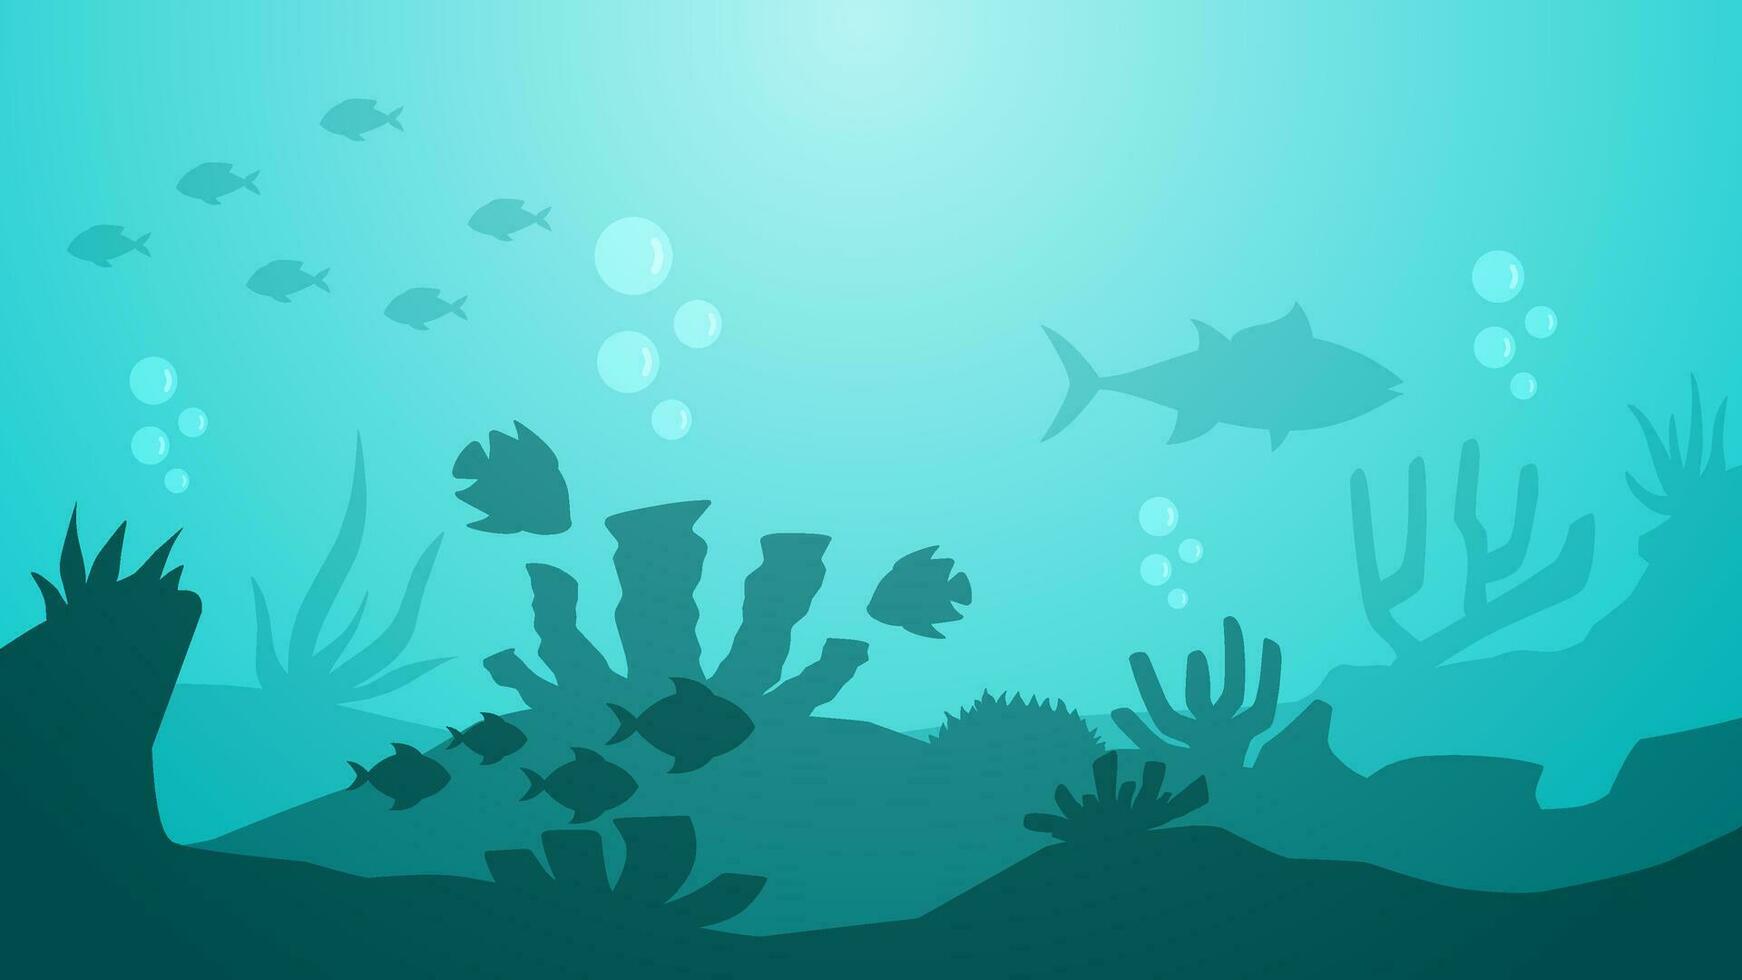 Seascape vector illustration. Scenery of fishes and coral reef in the bottom sea. Underwater panorama for illustration, background or wallpaper